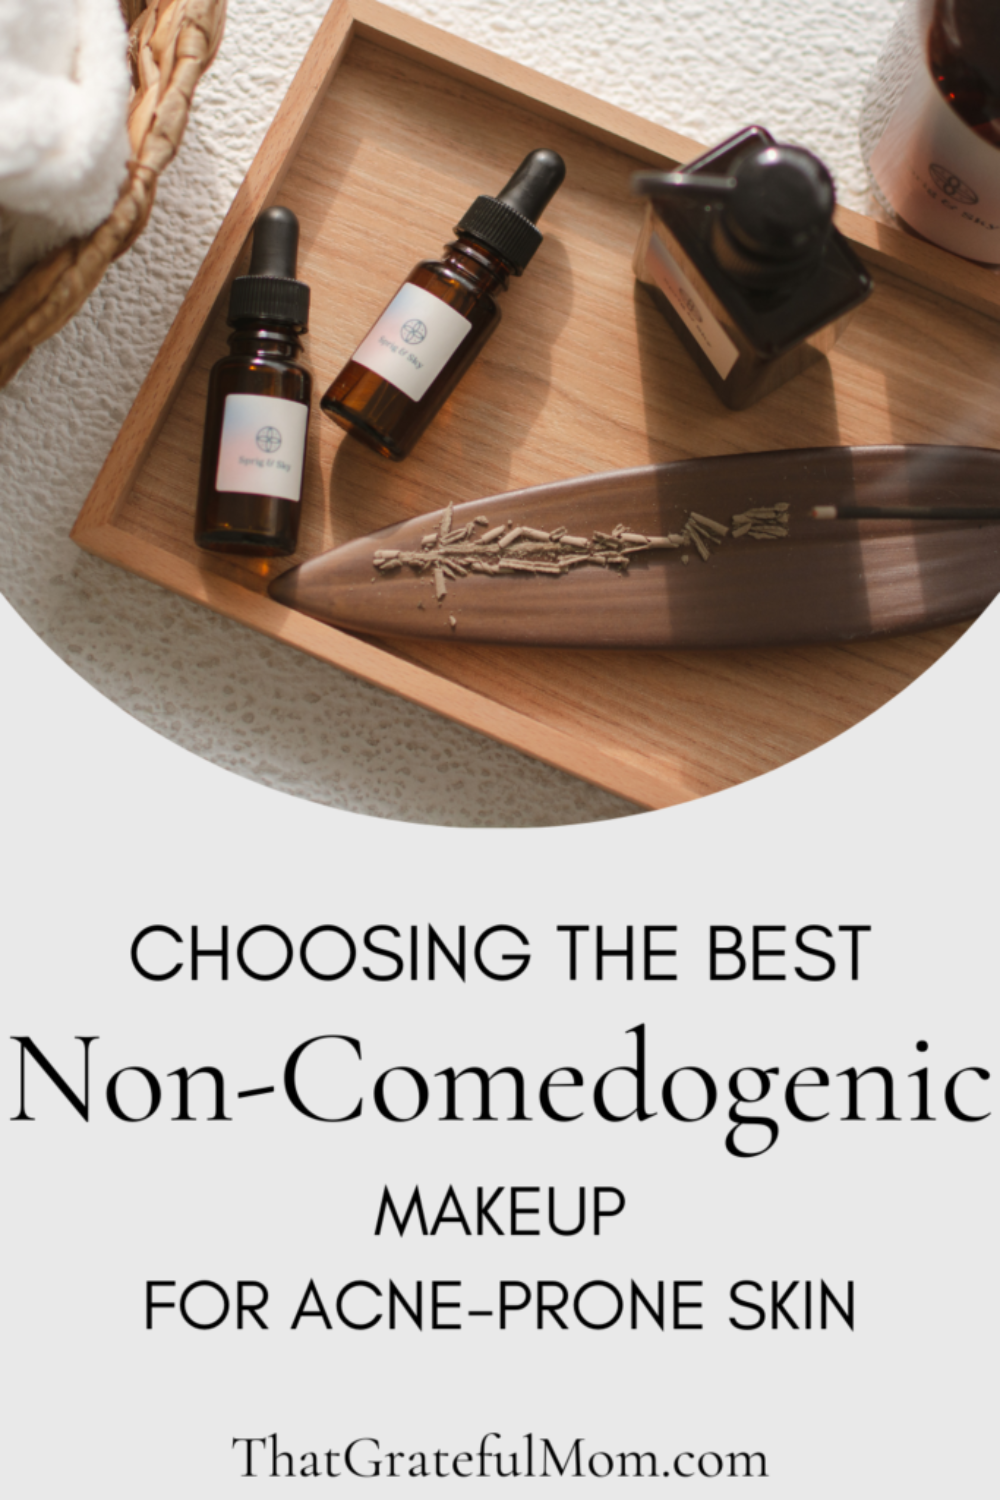 CHoosing the Best non-comedogenic makeup for acne-prone skin pin 3